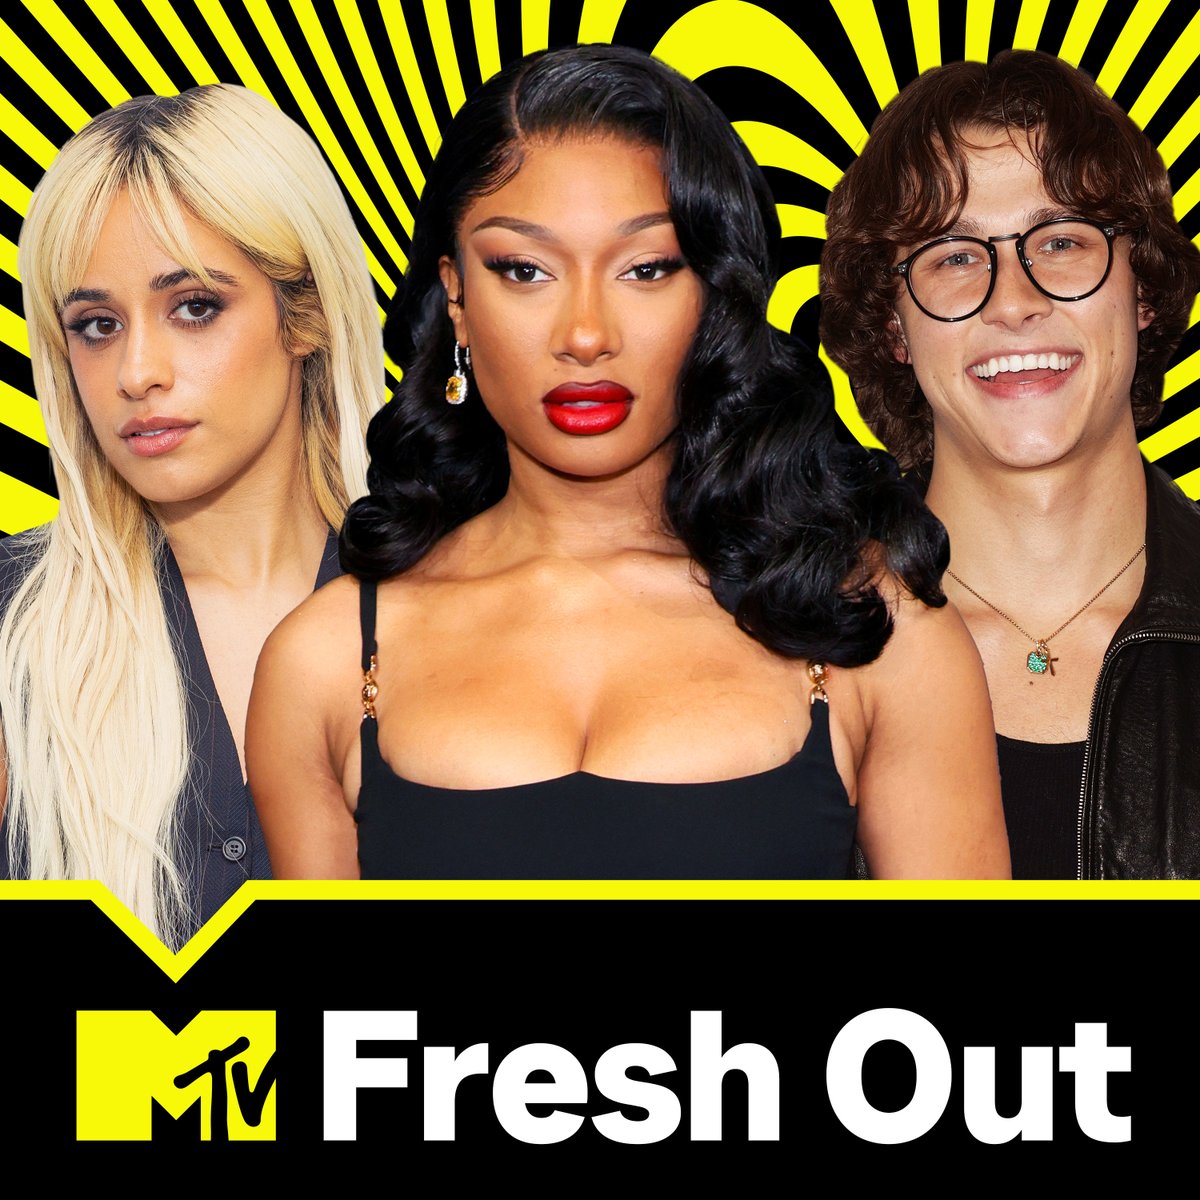 After a weekend FULL of listening, what was your favorite #NewMusicFriday release?!!

If you haven't yet, check out my new #MTVFreshOut playlist featuring @Camila_Cabello, @theestallion & @davidkushner_ 🎶

Spotify: open.spotify.com/playlist/6Vayw……
Apple Music: music.apple.com/us/playlist/mt……